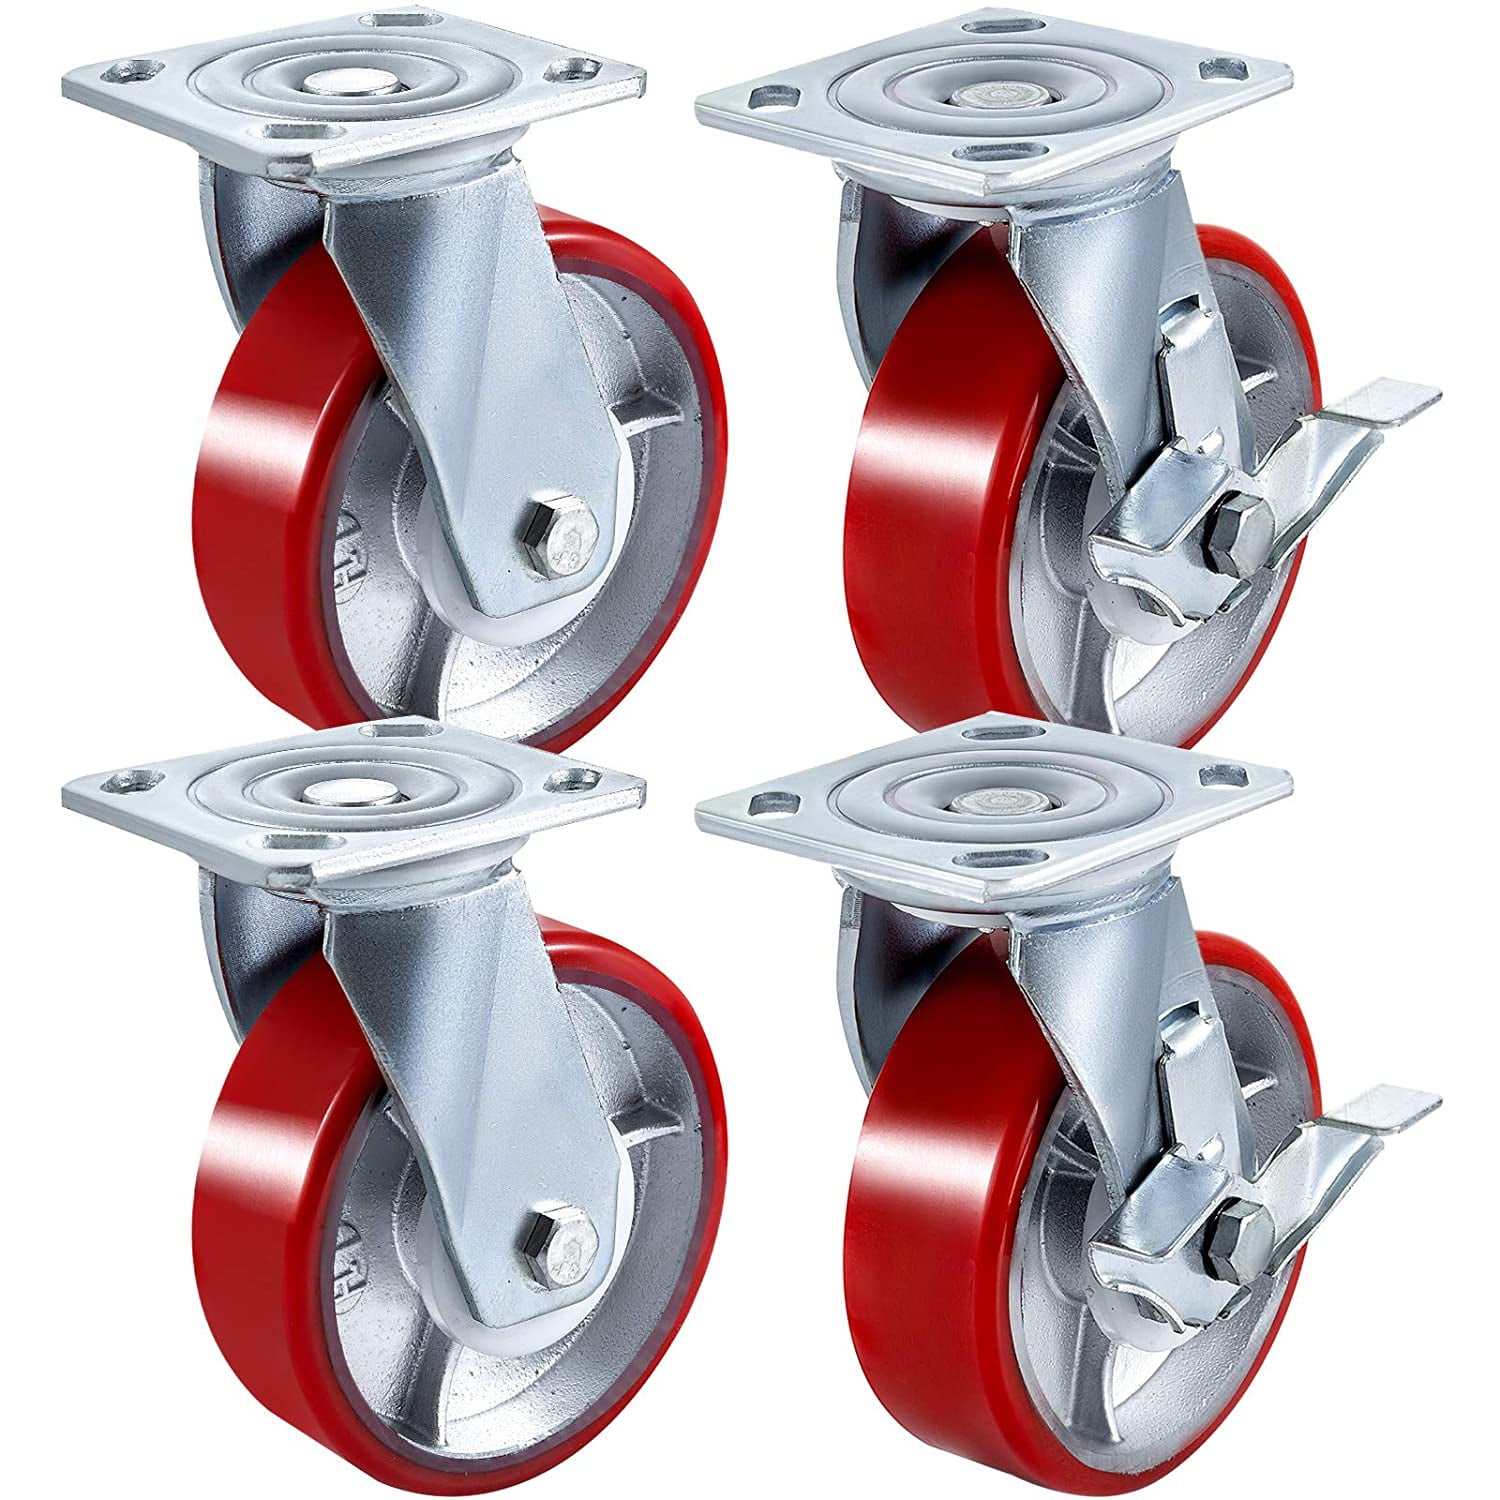 Red Polyurethane on Steel Core with 5" x 2" Heavy Duty Swivel Caster Set of 4 